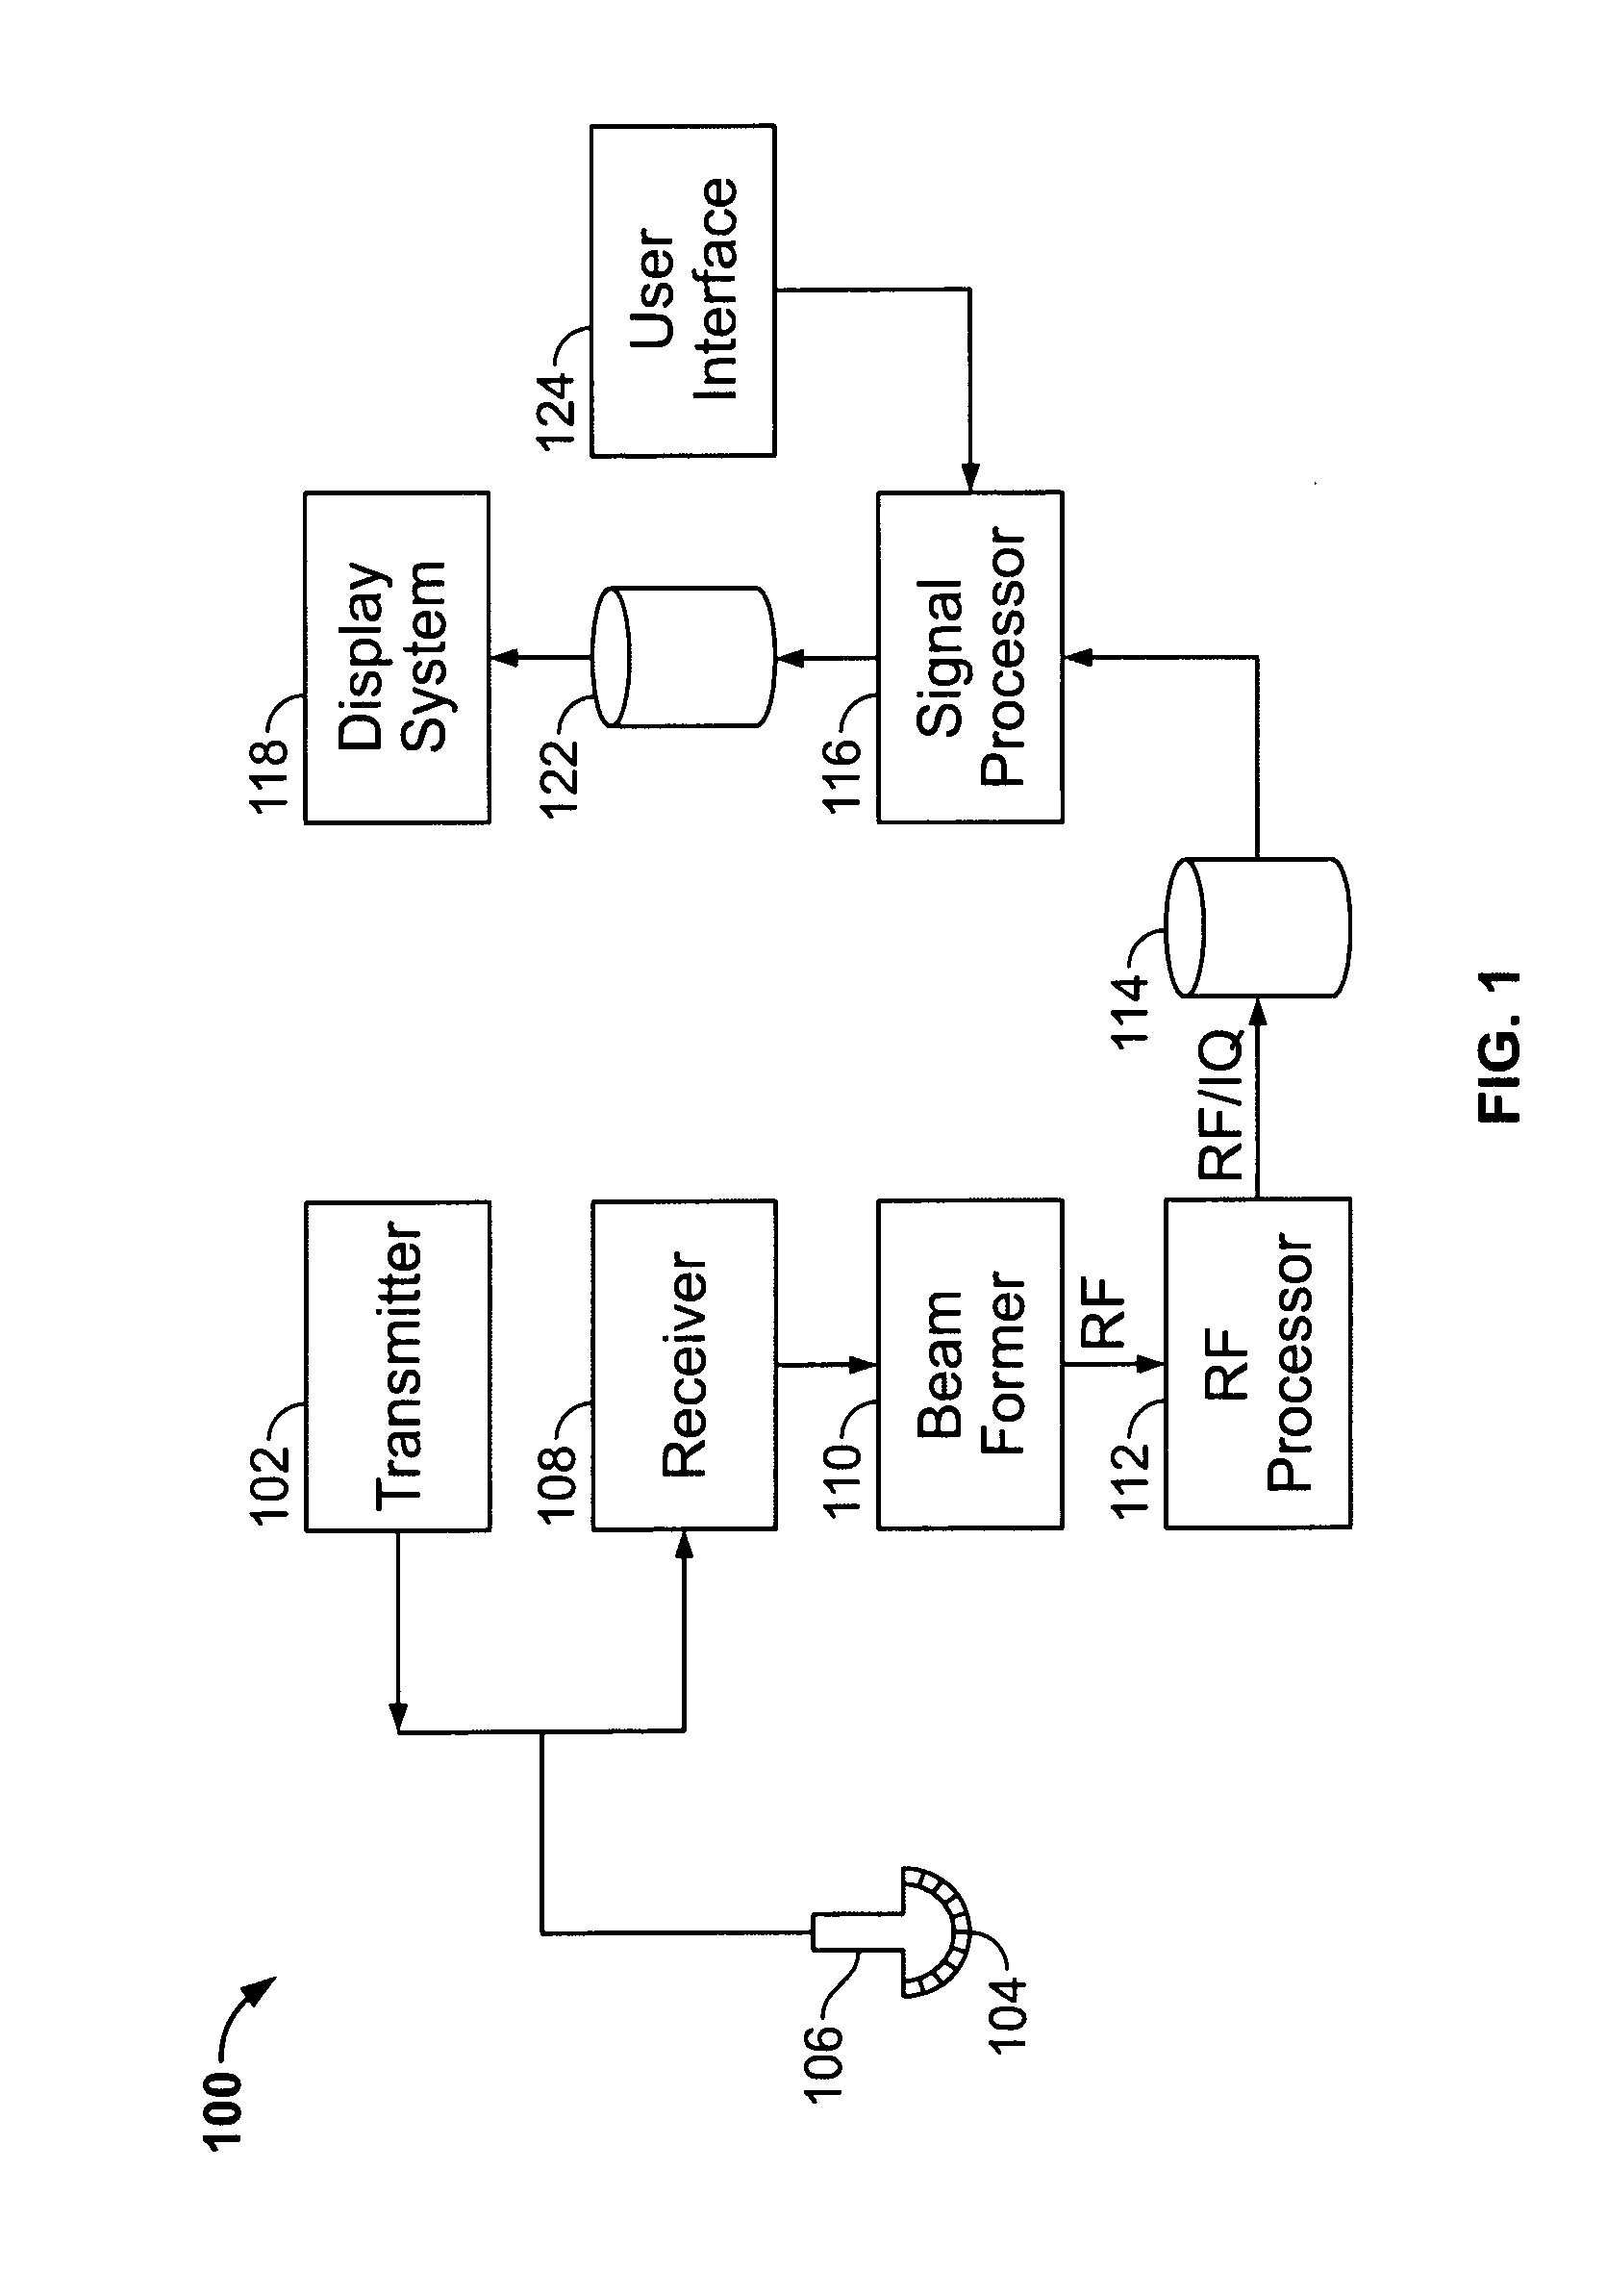 System and method for automatically obtaining ultrasound image planes based on patient specific information